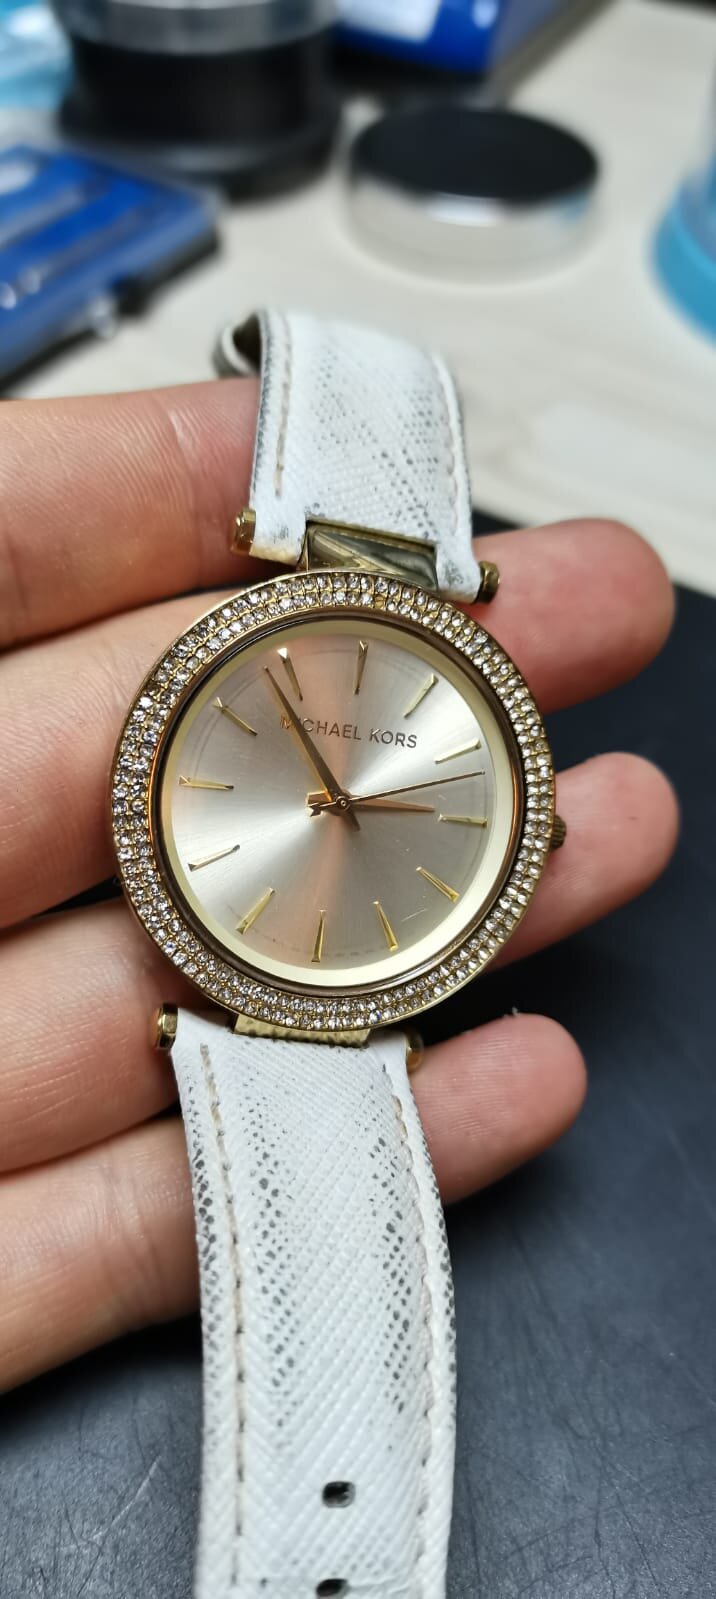 Michael Kors Watch Repair MK2391 111501 In For New Strap, Battery, Stones  And Clean From Welwynhatfield, Watches Fixed Watch Repairs Latest Watch  News Watch Hub 